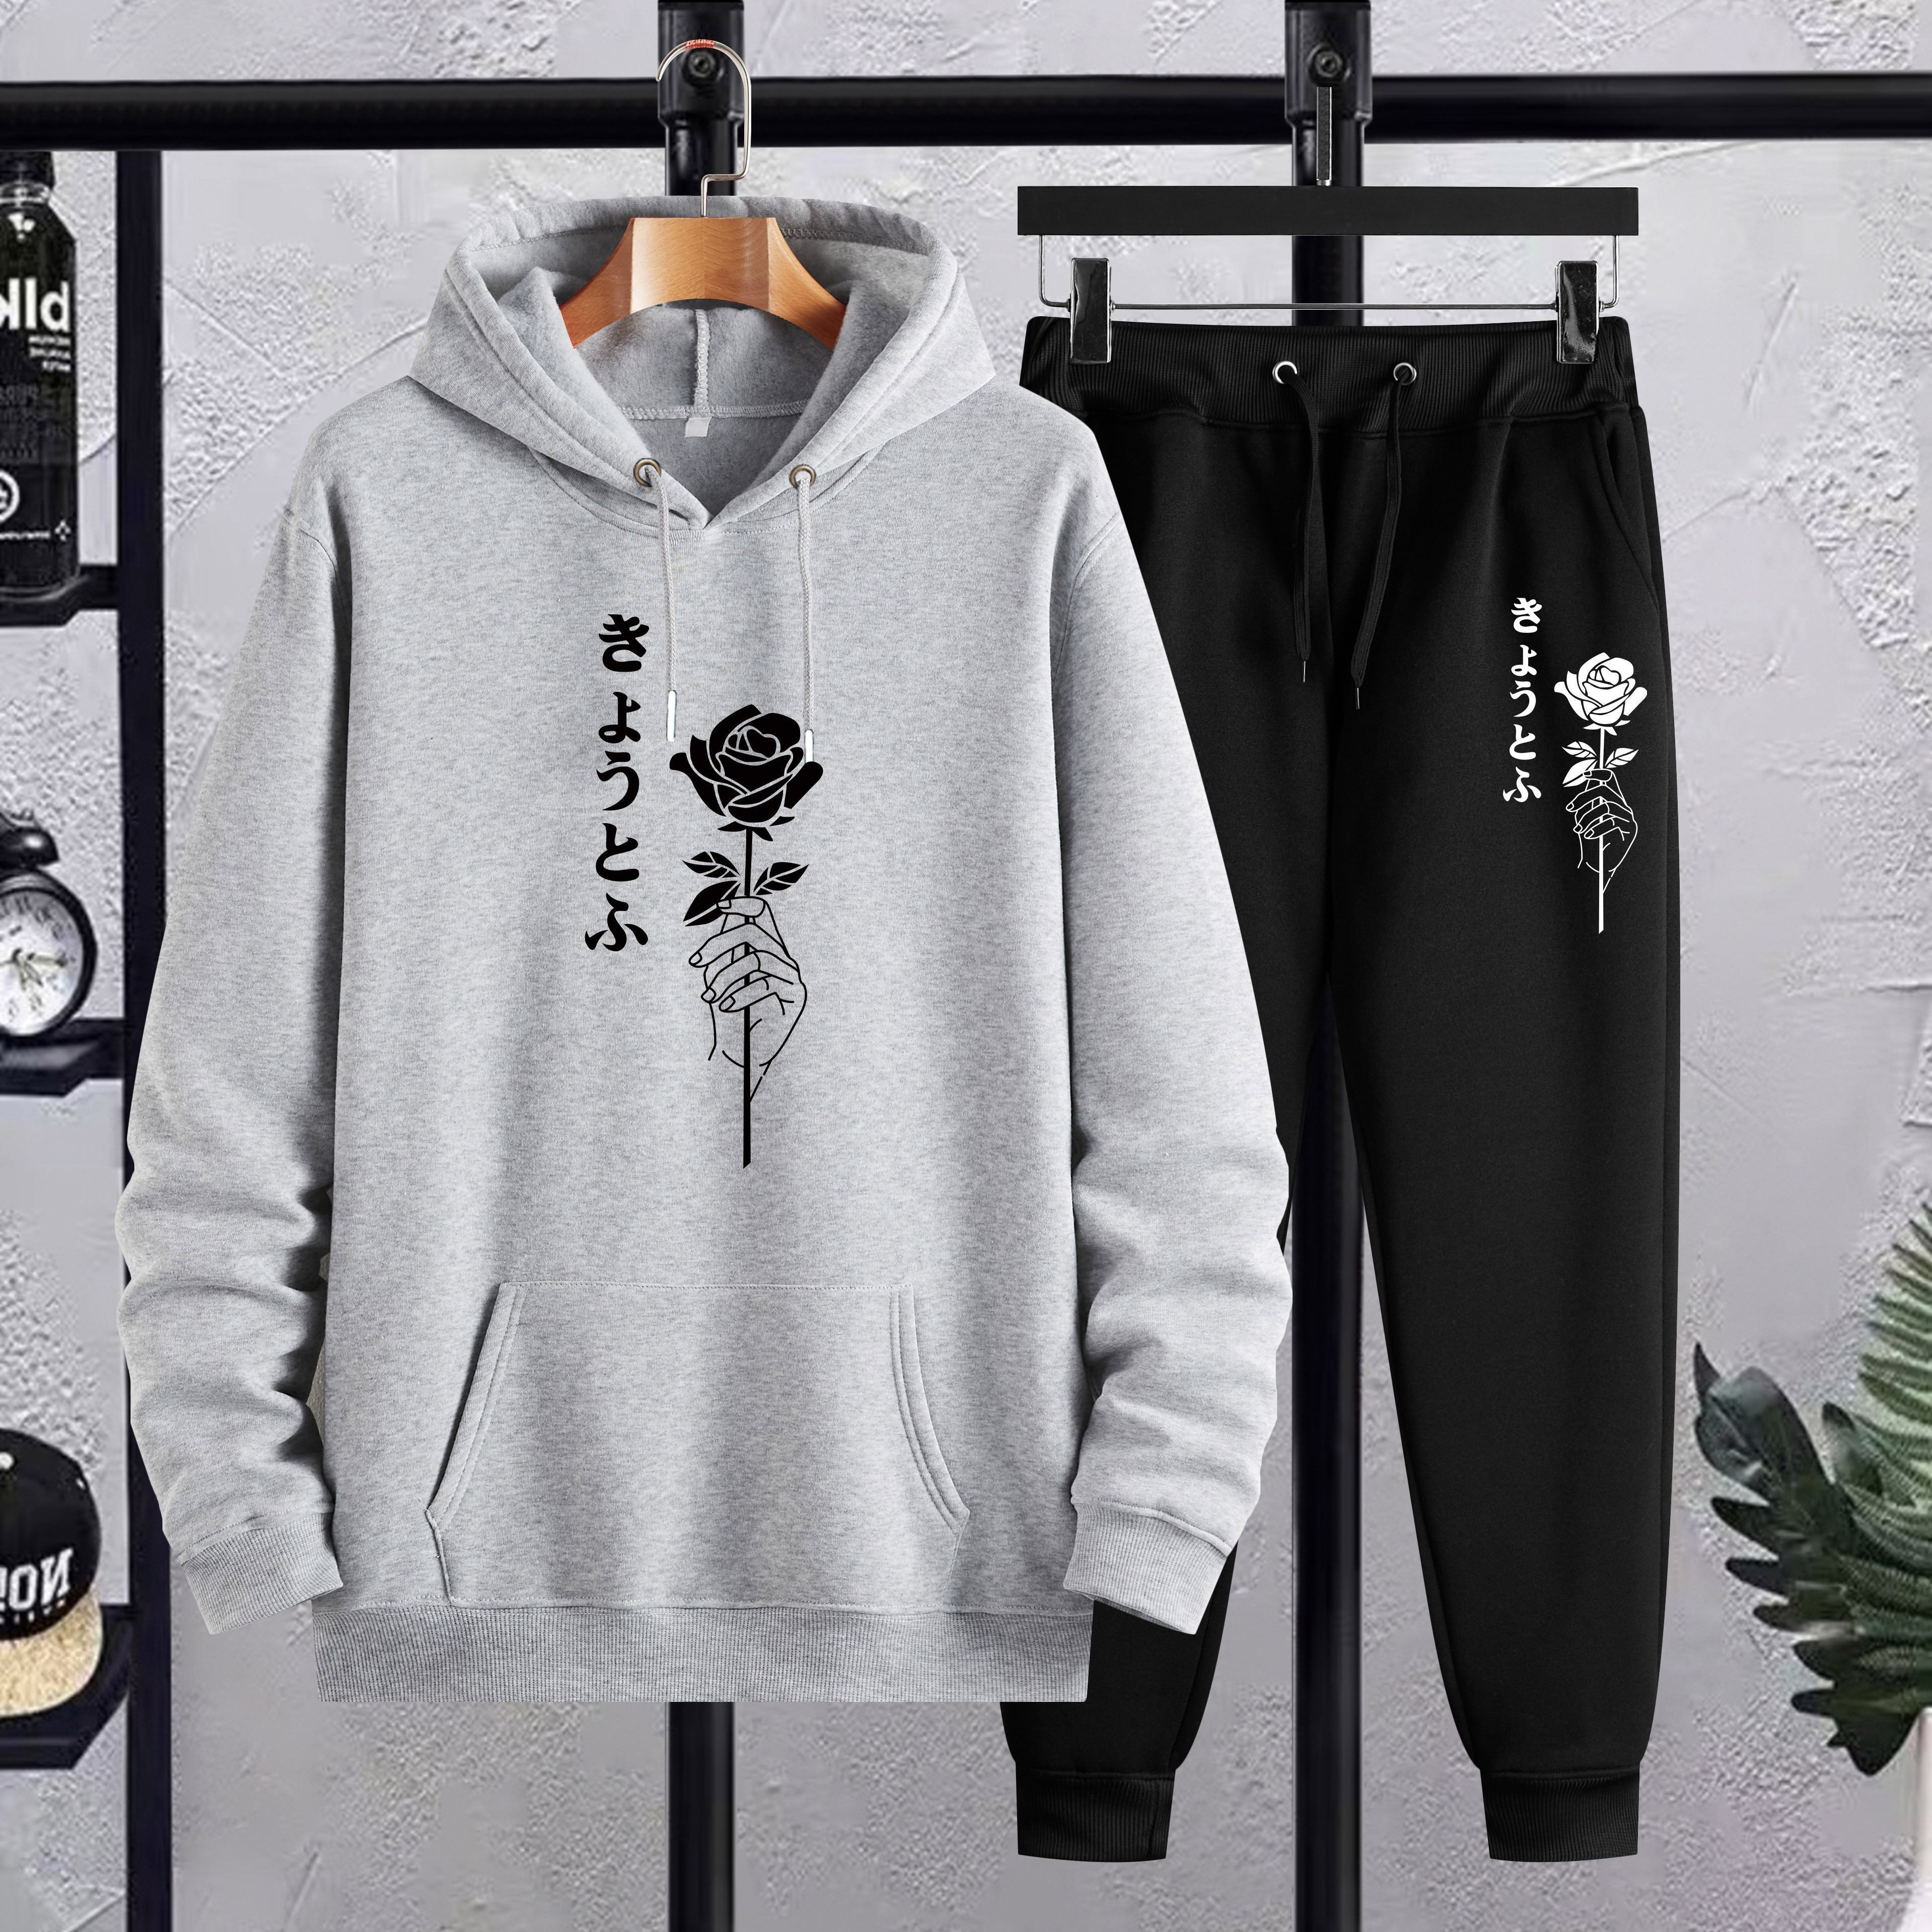 

rose" Element Graphic Print Men's Casual Hoodies & Pants Sets, Oversized Loose Clothing Plus Size For Winter Fall